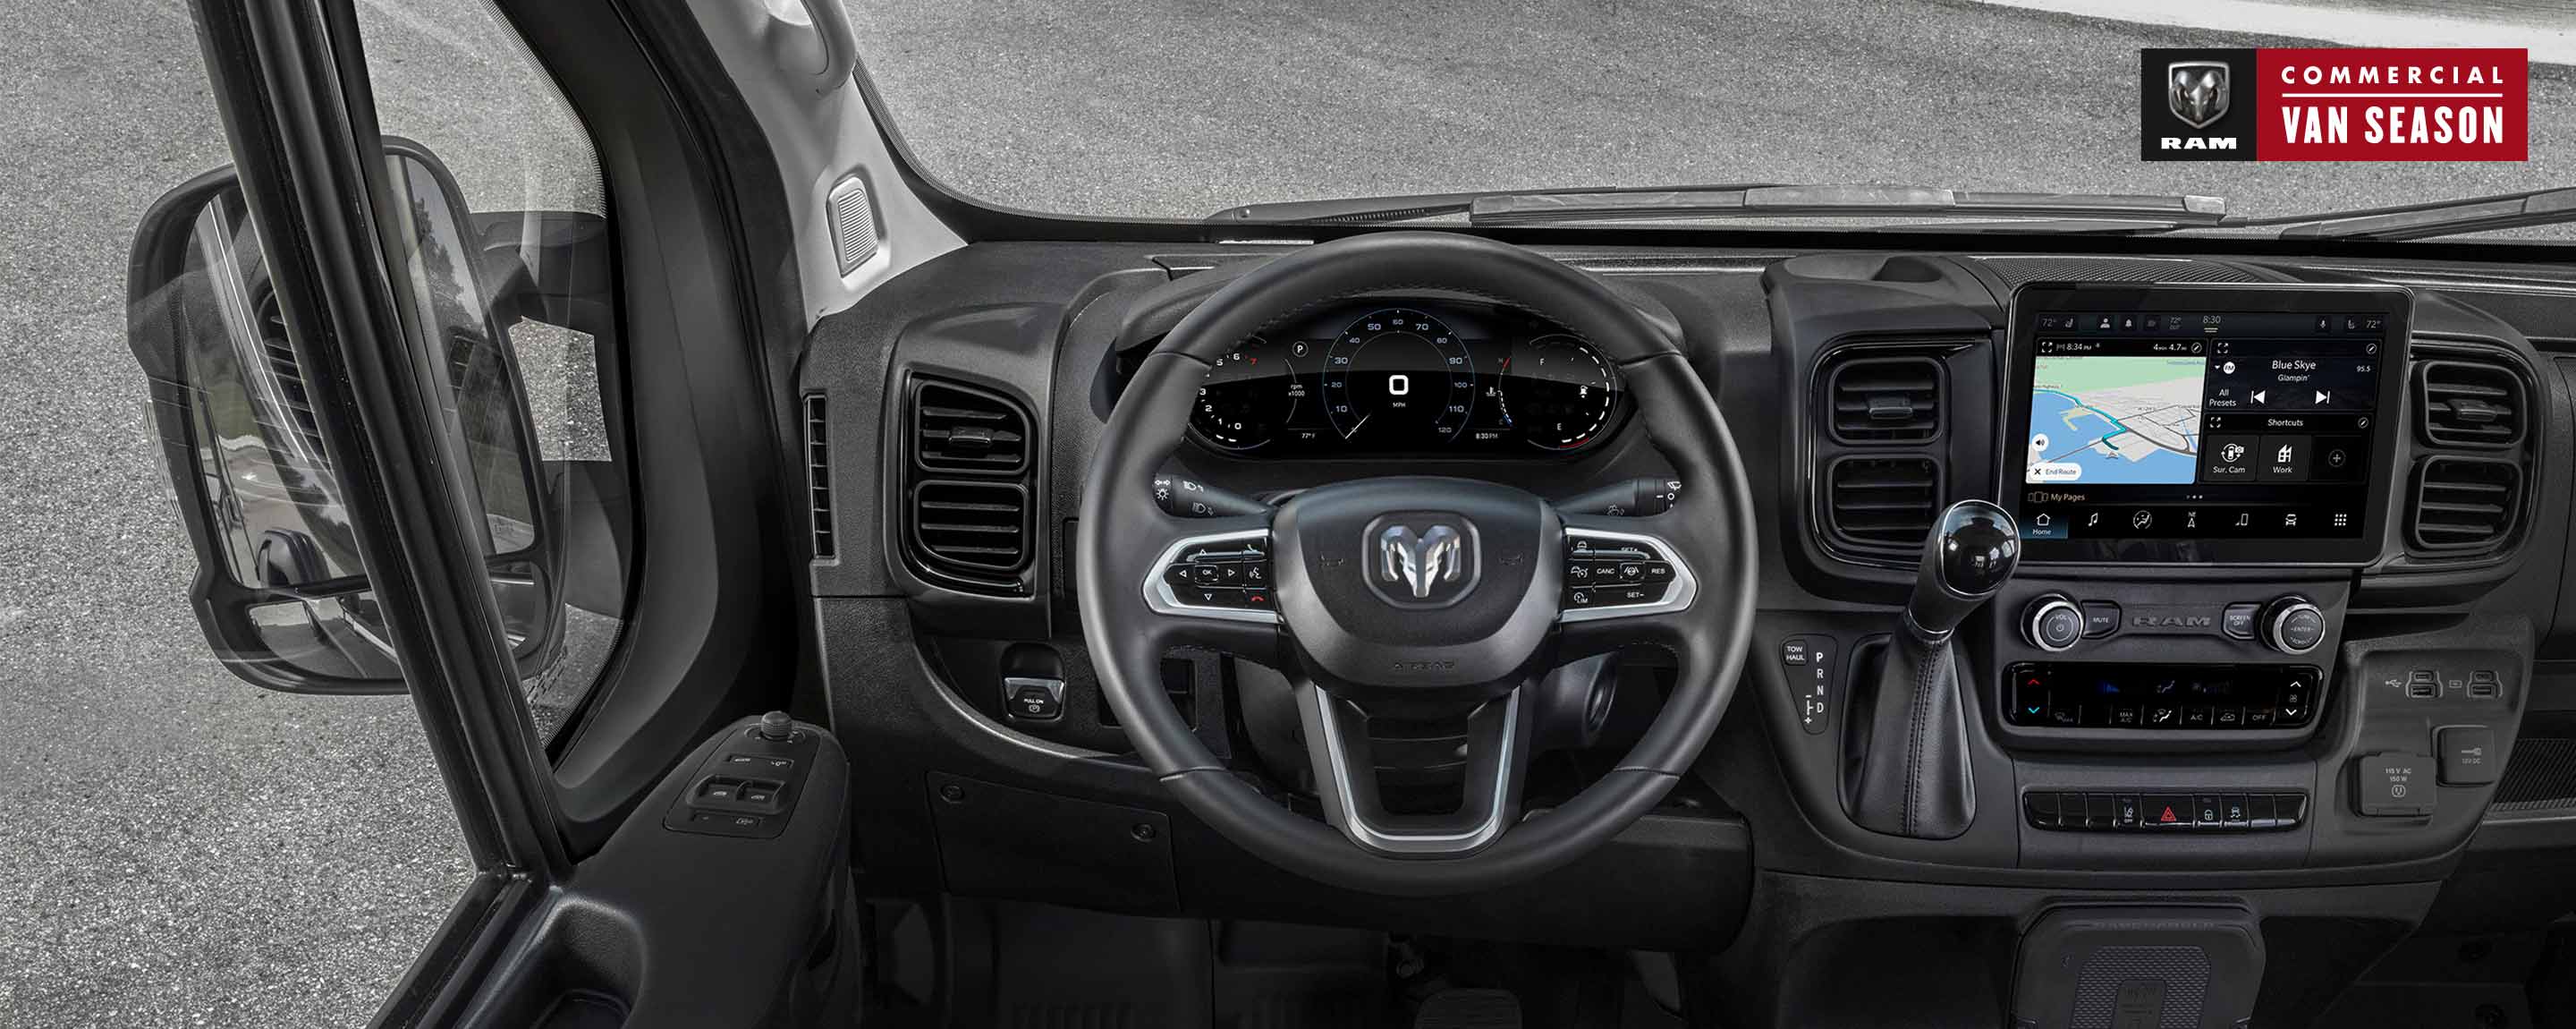 Ram Commercial Van Season. The interior of the 2022 Ram ProMaster, focusing on the steering wheel, climate controls and touchscreen.